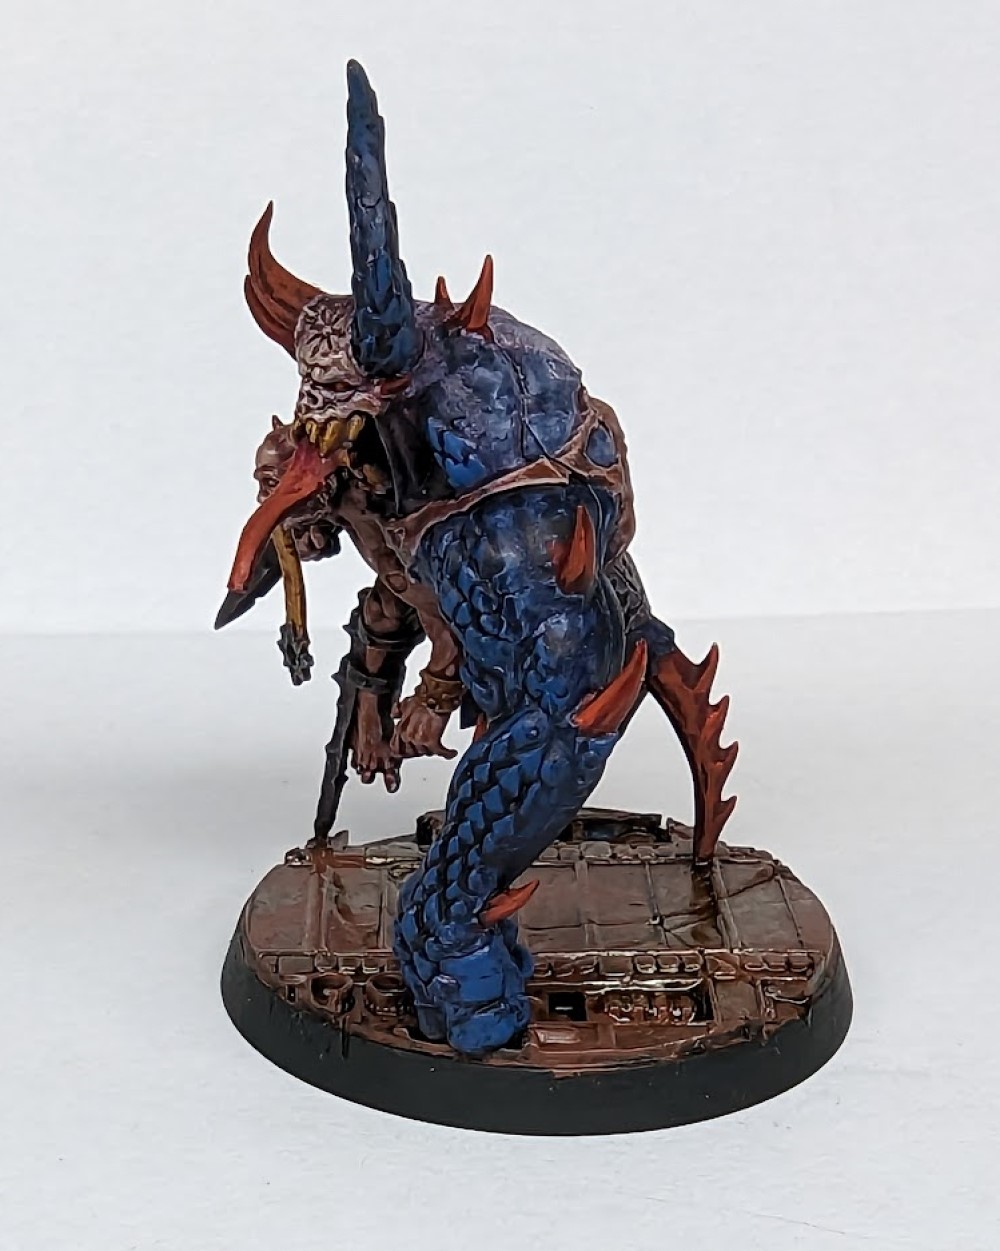 The Analogue Hobbies Painting Challenge: From JamesM: Helot Cult